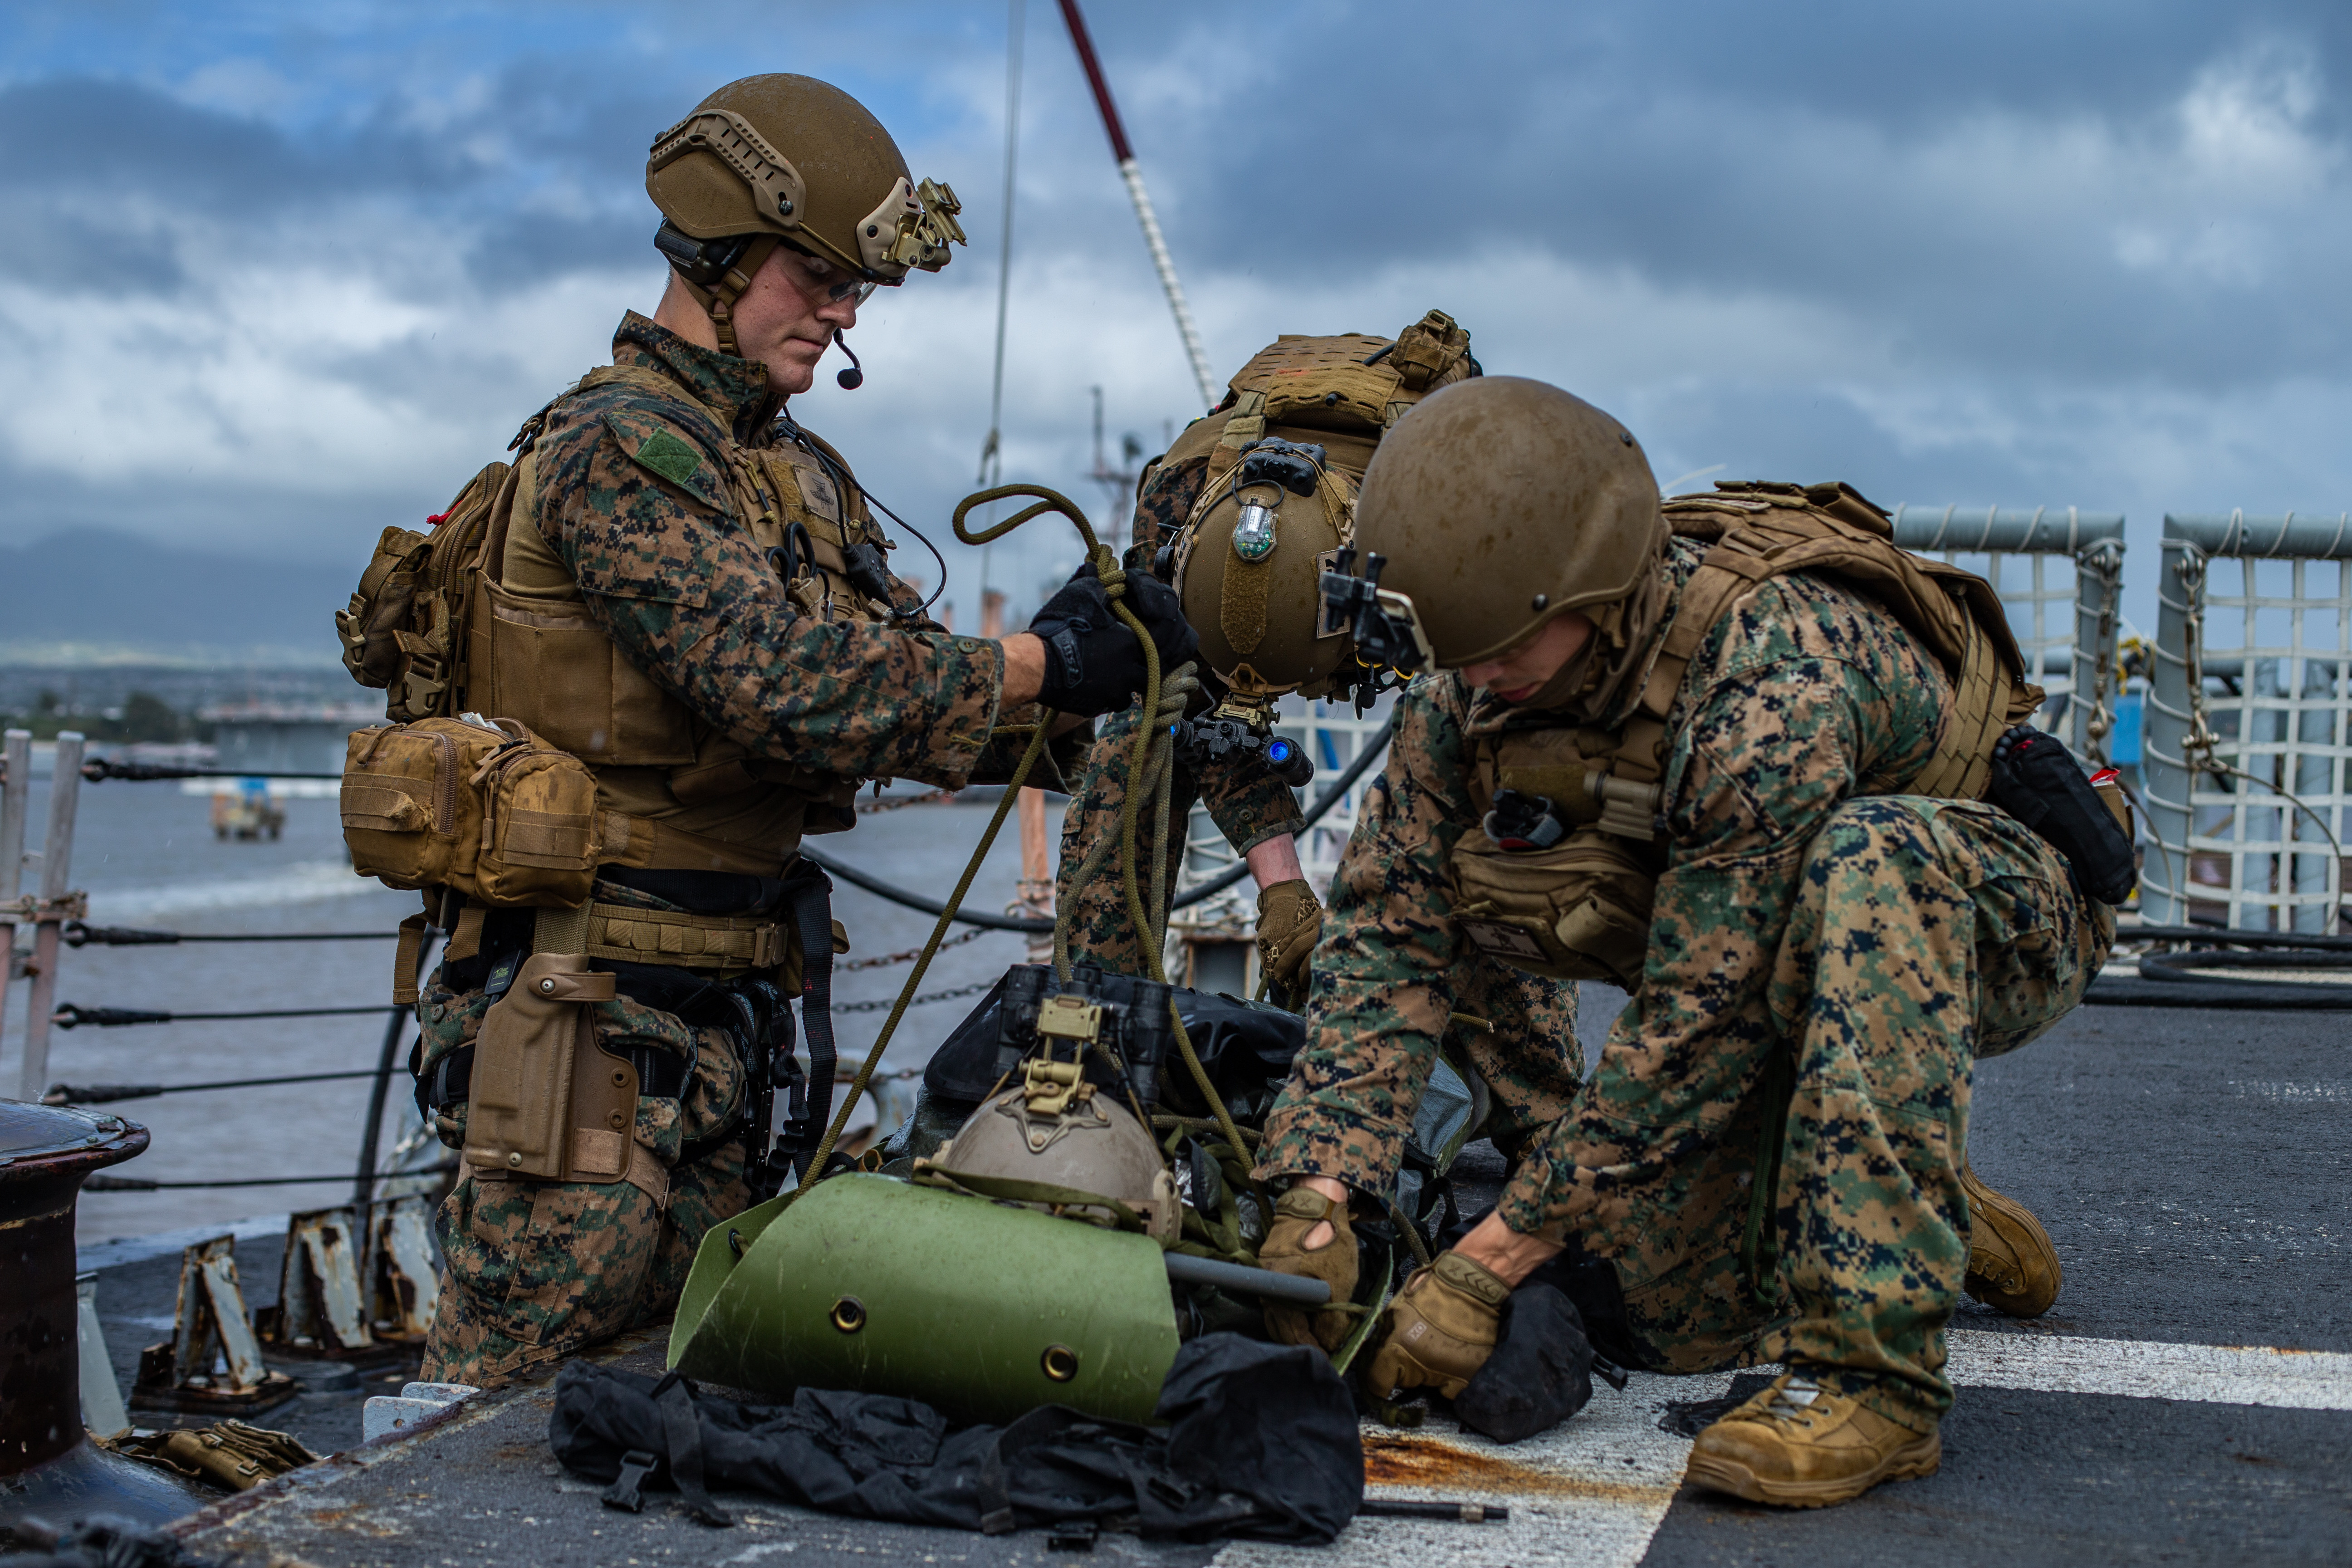 31st Marine Expeditionary Unit Maritime Raid Force begins Training Exercise  in Hawaii > U.S. Indo-Pacific Command > 2015